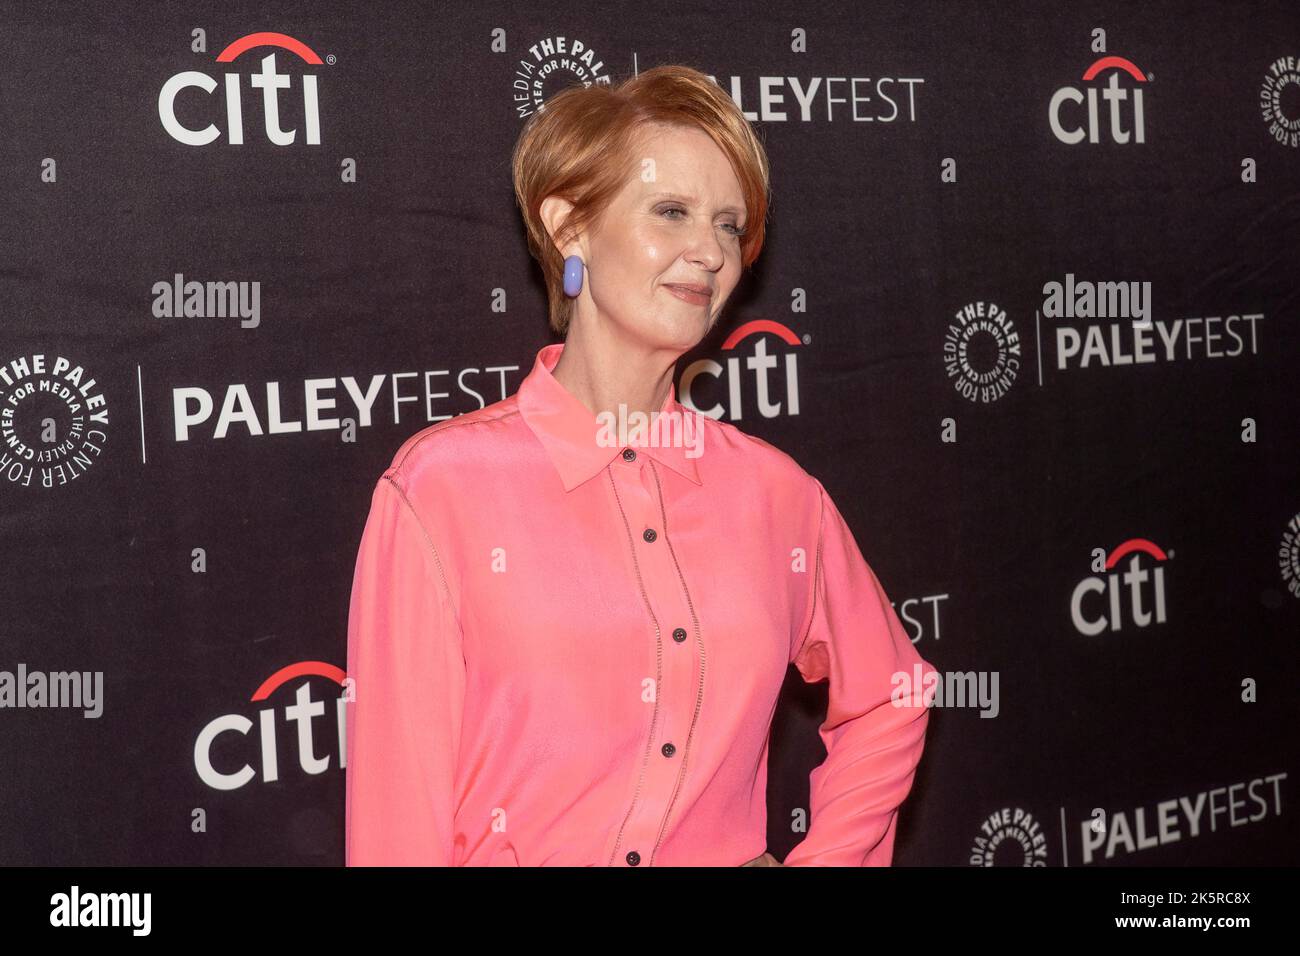 NEW YORK, NEW YORK - OCTOBER 09: Cynthia Nixon attends 'The Gilded Age' during 2022 PaleyFest NY at Paley Museum on October 09, 2022 in New York City. Credit: Ron Adar/Alamy Live News Stock Photo